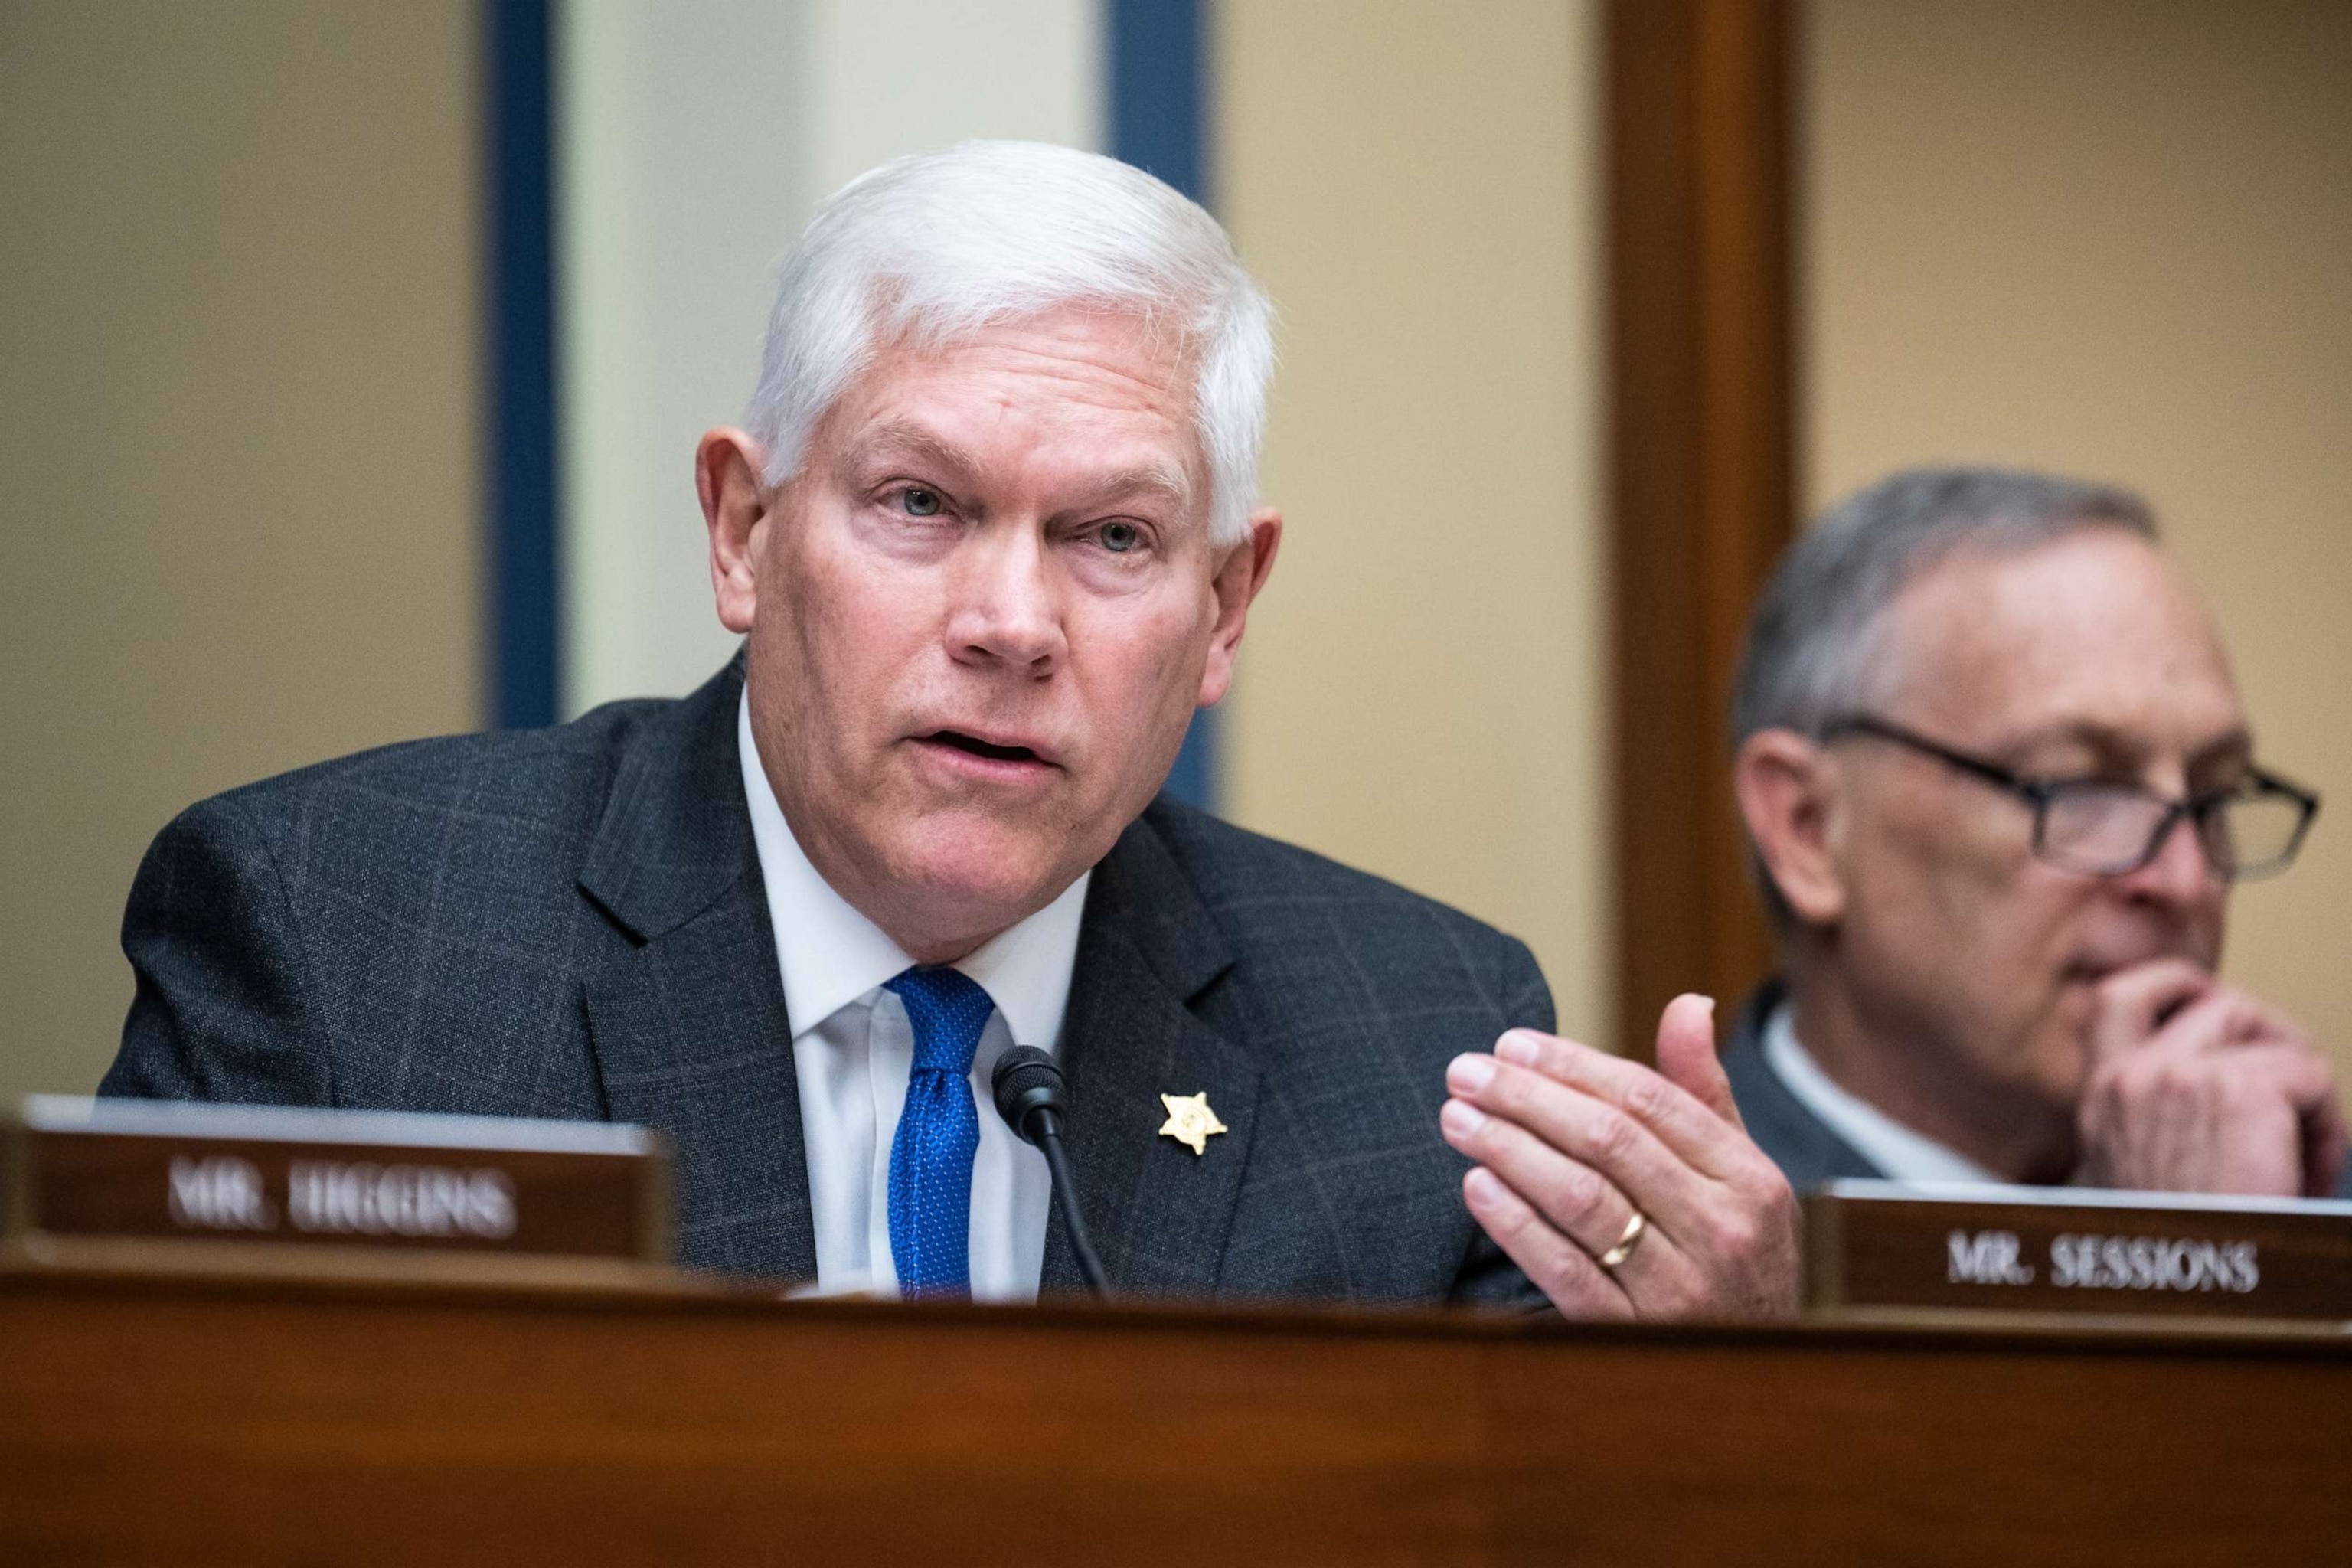 PHOTO: Rep. Pete Sessions attends a House Oversight and Accountability Committee hearing, in Washington, March 9, 2023.